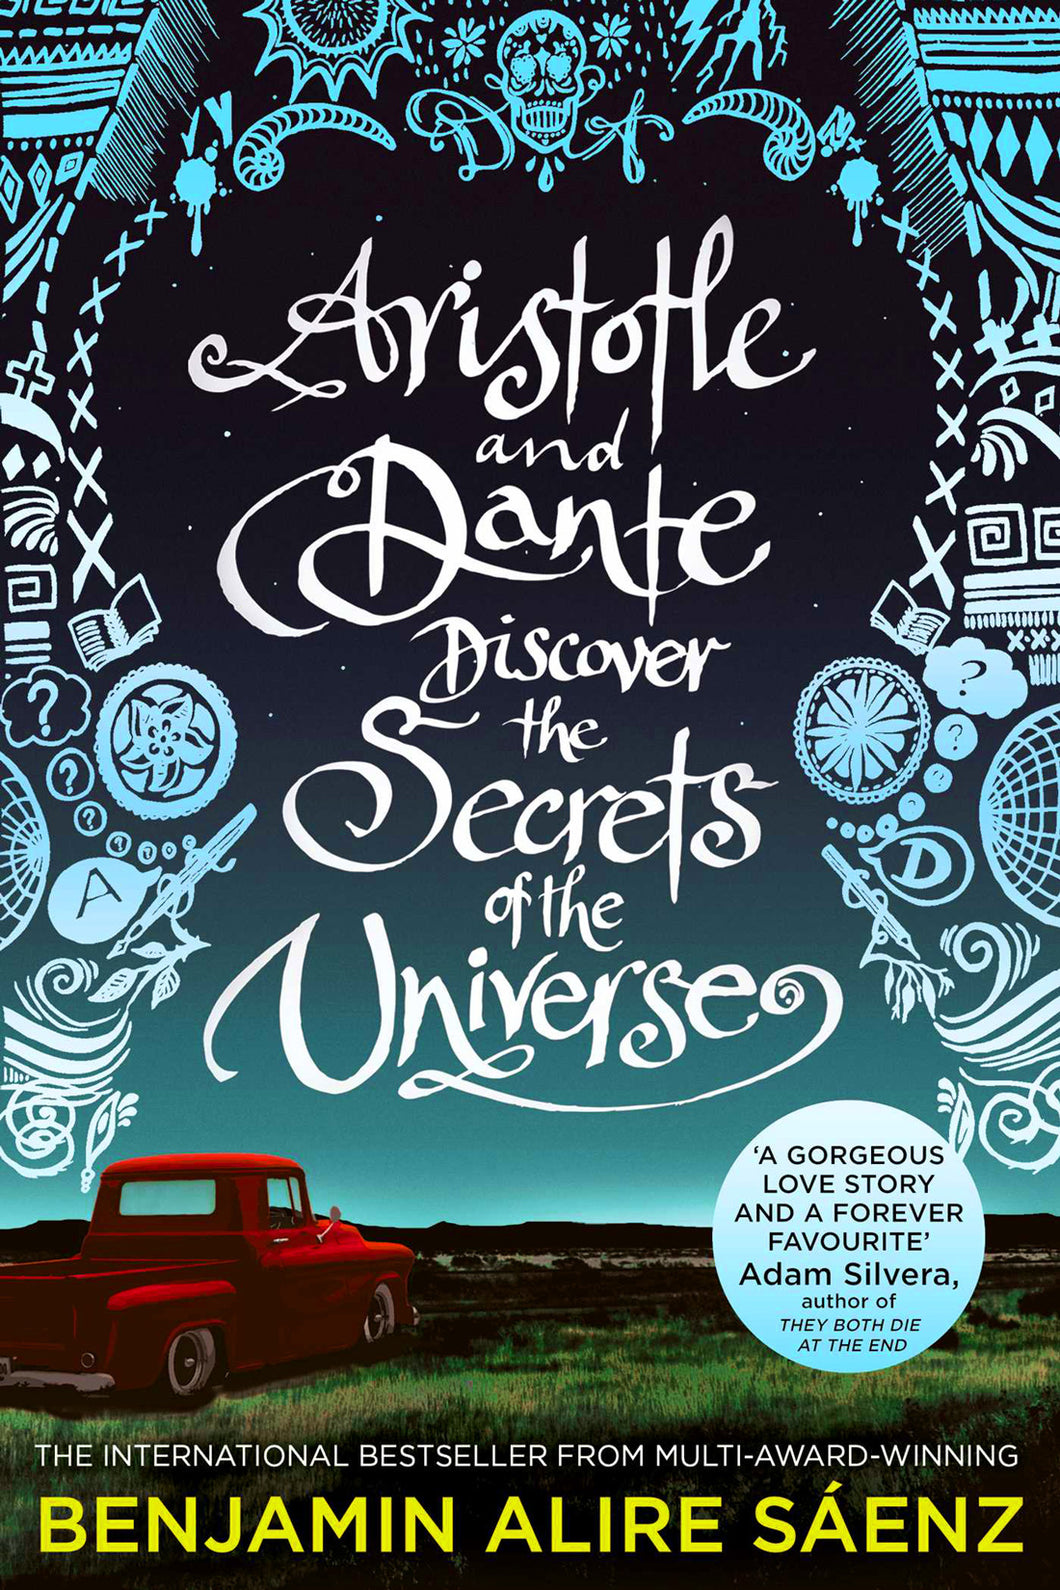 Aristotle and Dante Discover the Secrets of the Universe by Benjamin Alire Sáenz / Hardcover or Paperback - NEW BOOK (English or Spanish)